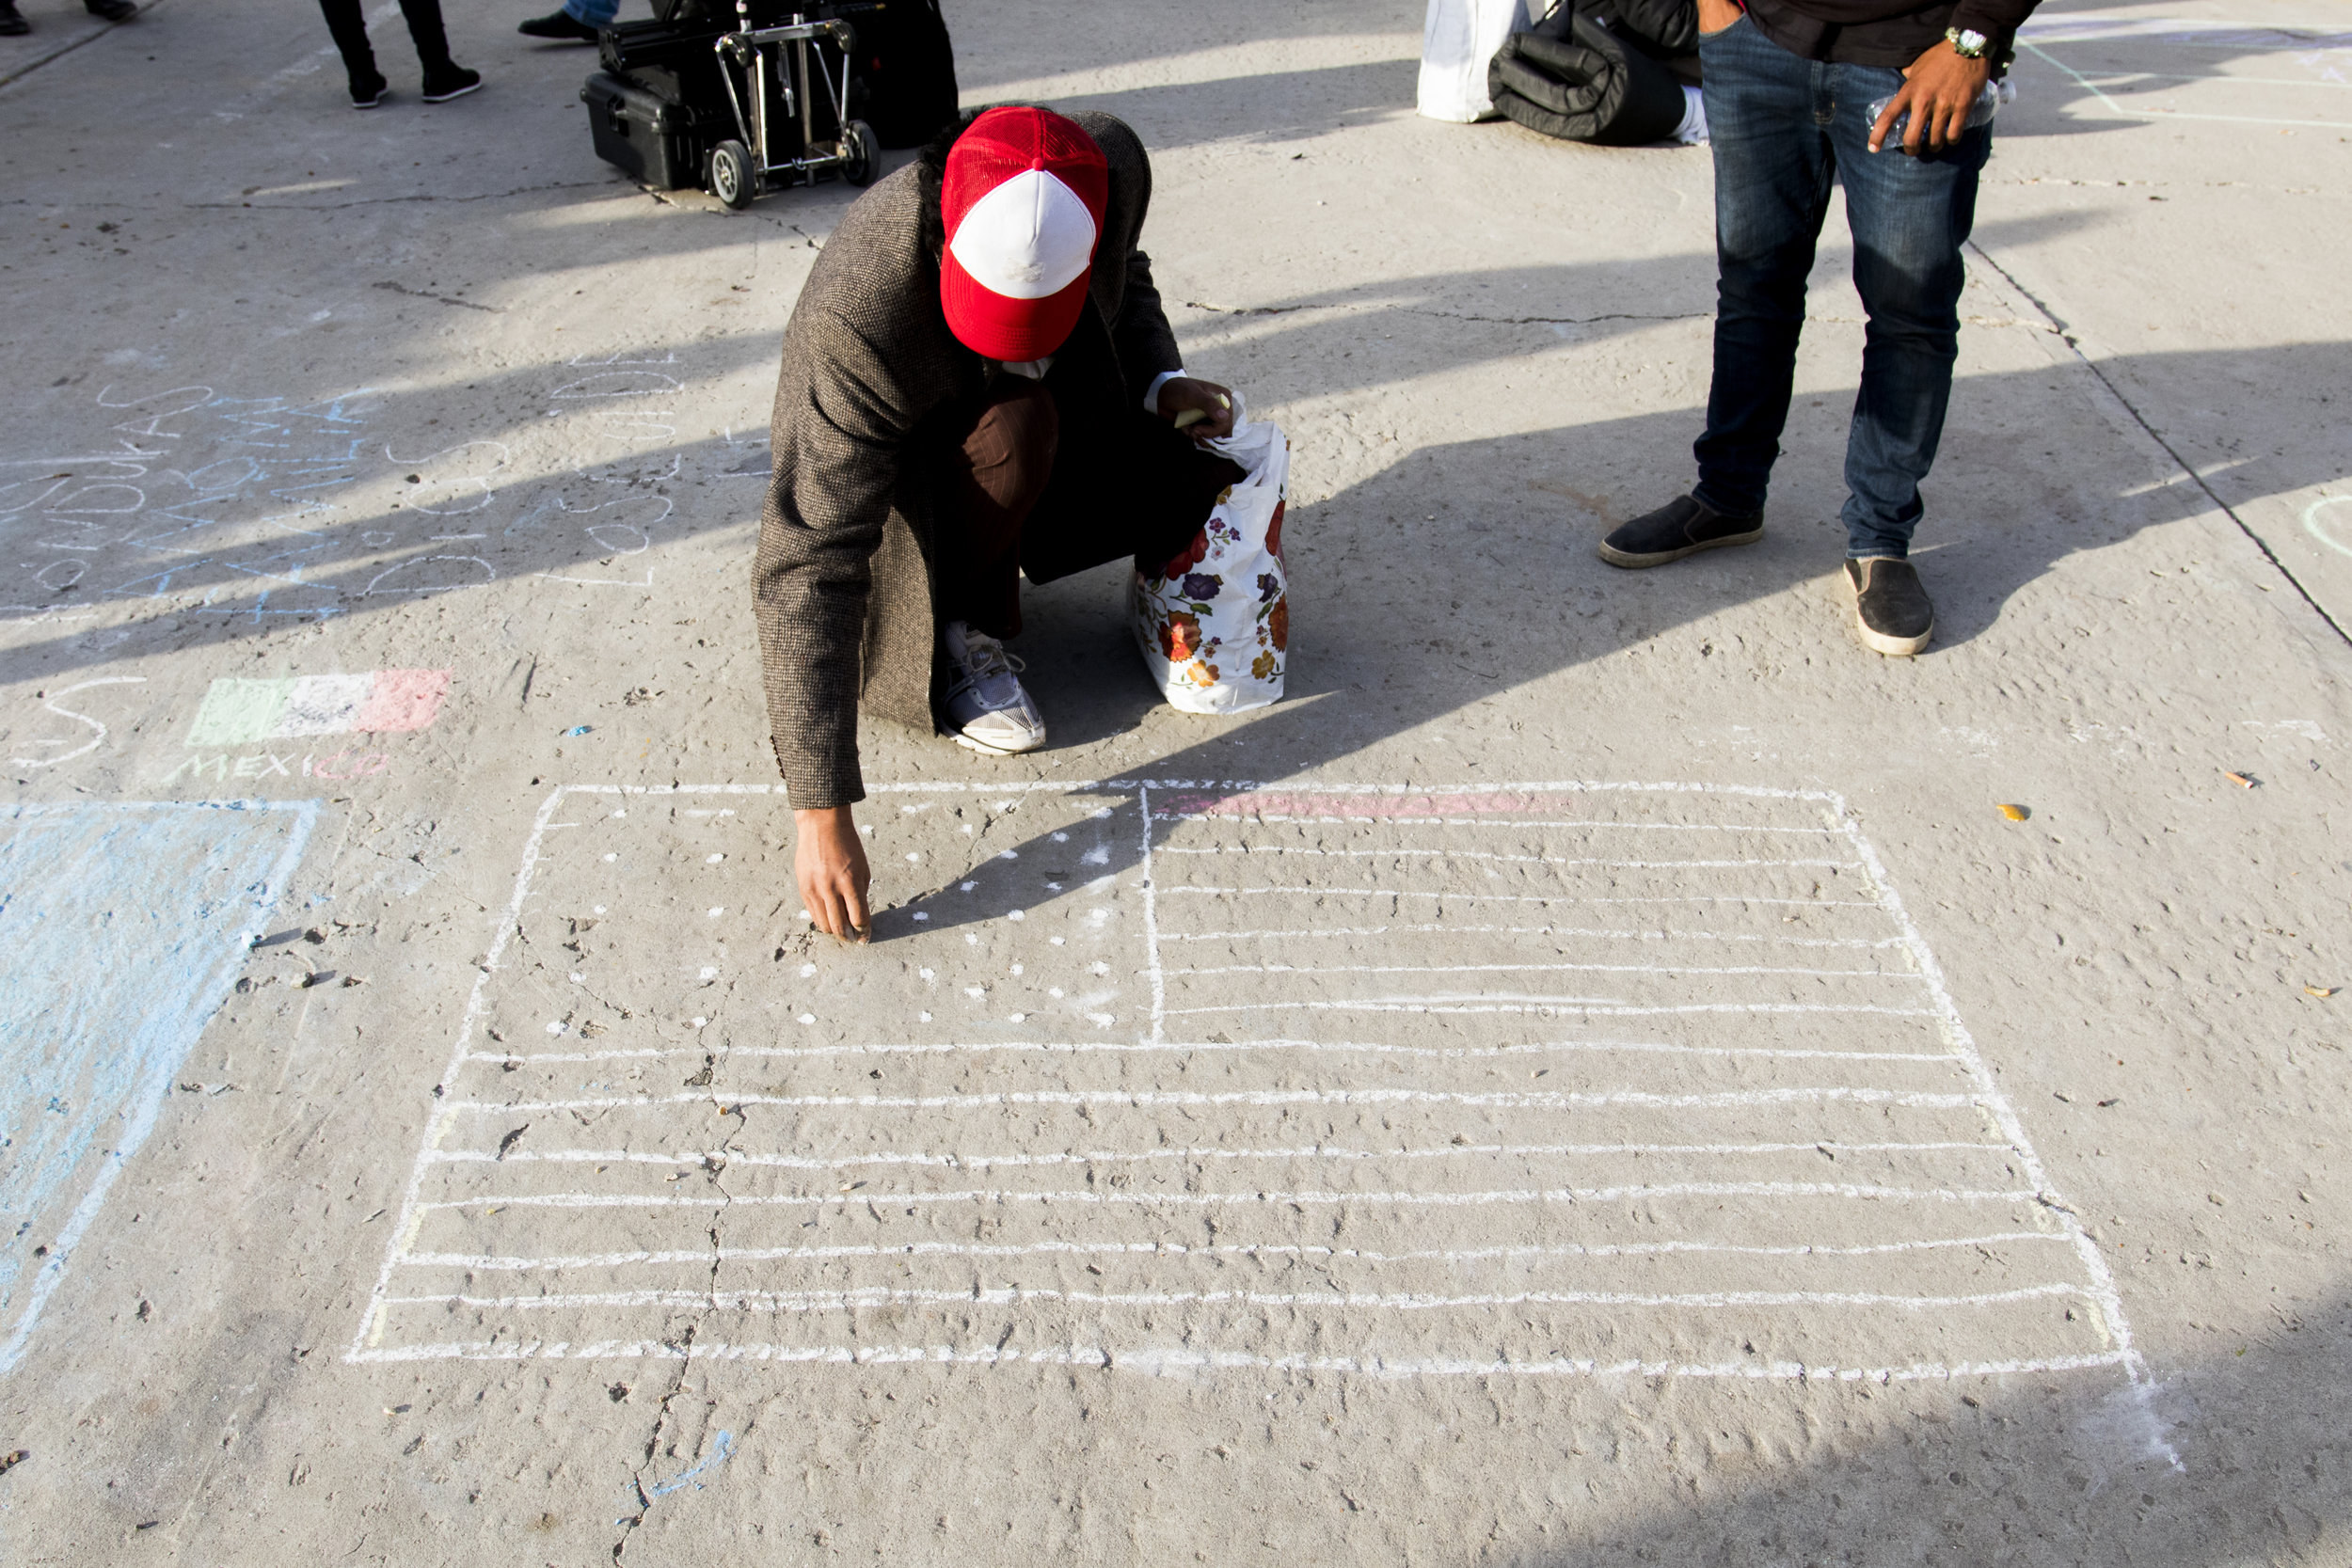   Christian, a migrant male, uses chalk to draw an American Flag on the ground of the El Barretal shelter  in Tijuana, Mexico, Saturday, Dec. 1, 2018. Photo By: Zane Meyer-Thornton/ Corsair Contributor  